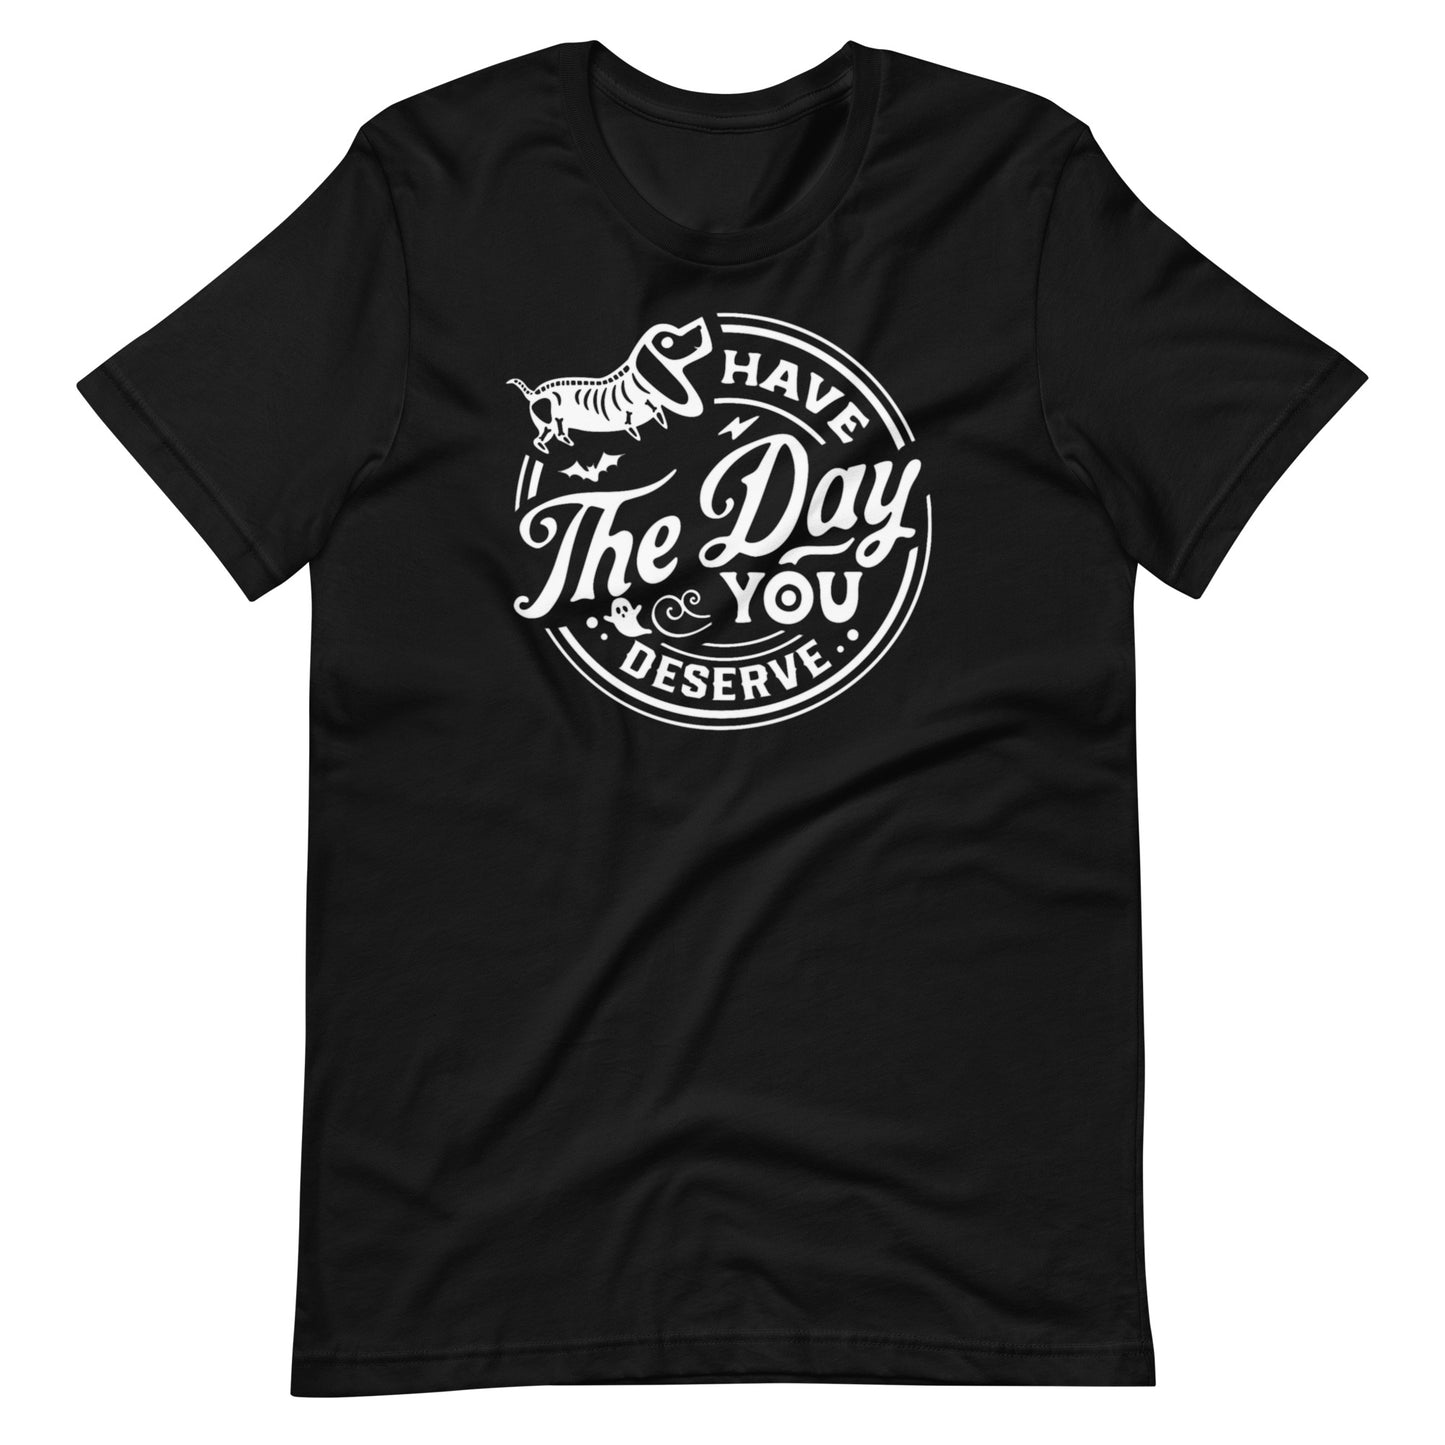 TEE - have the day you deserve